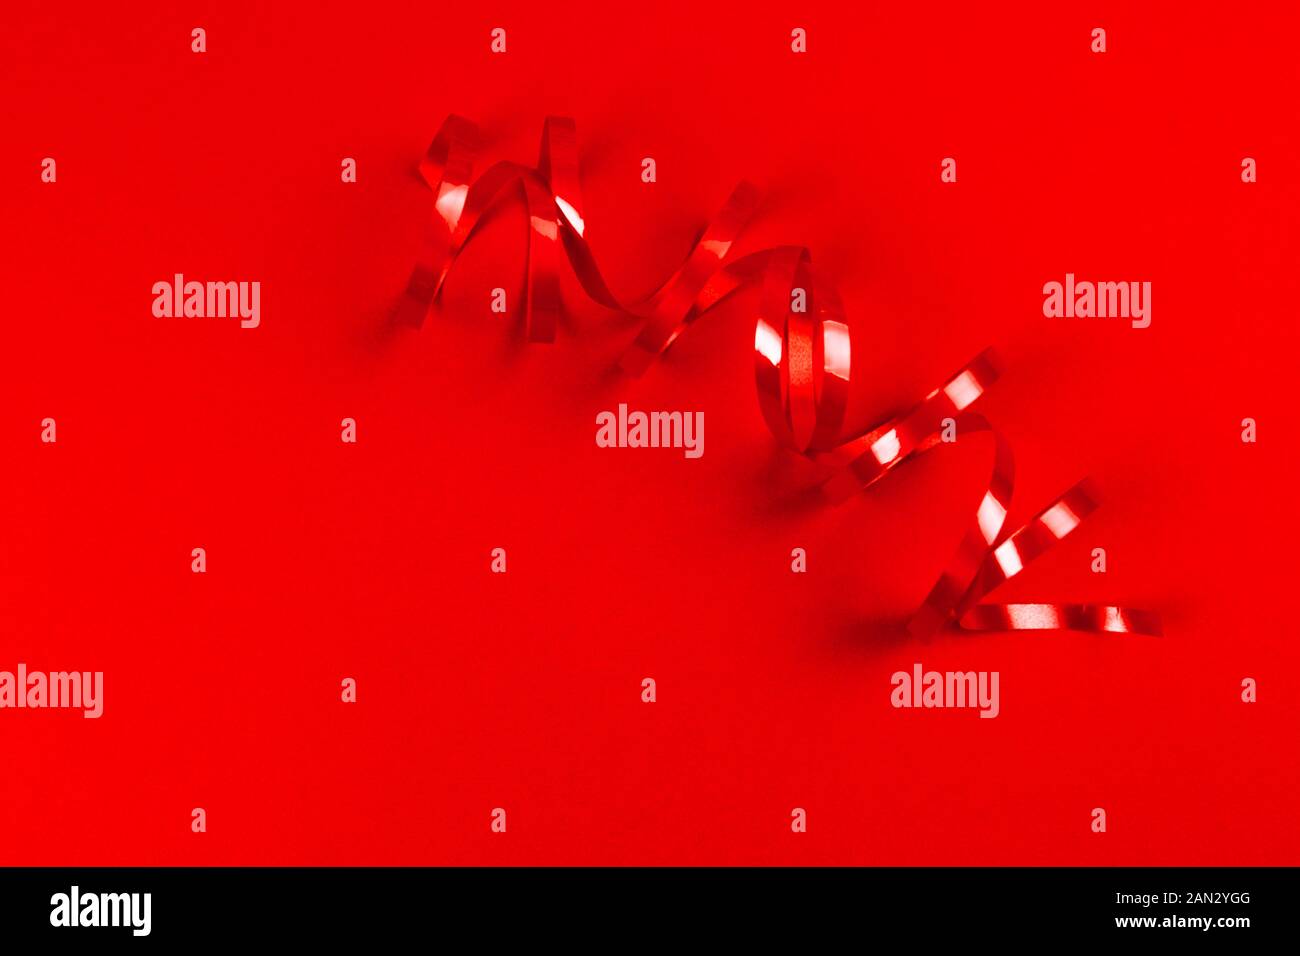 Red ribbon roll on red background. Hollyday and party concept. Stock Photo